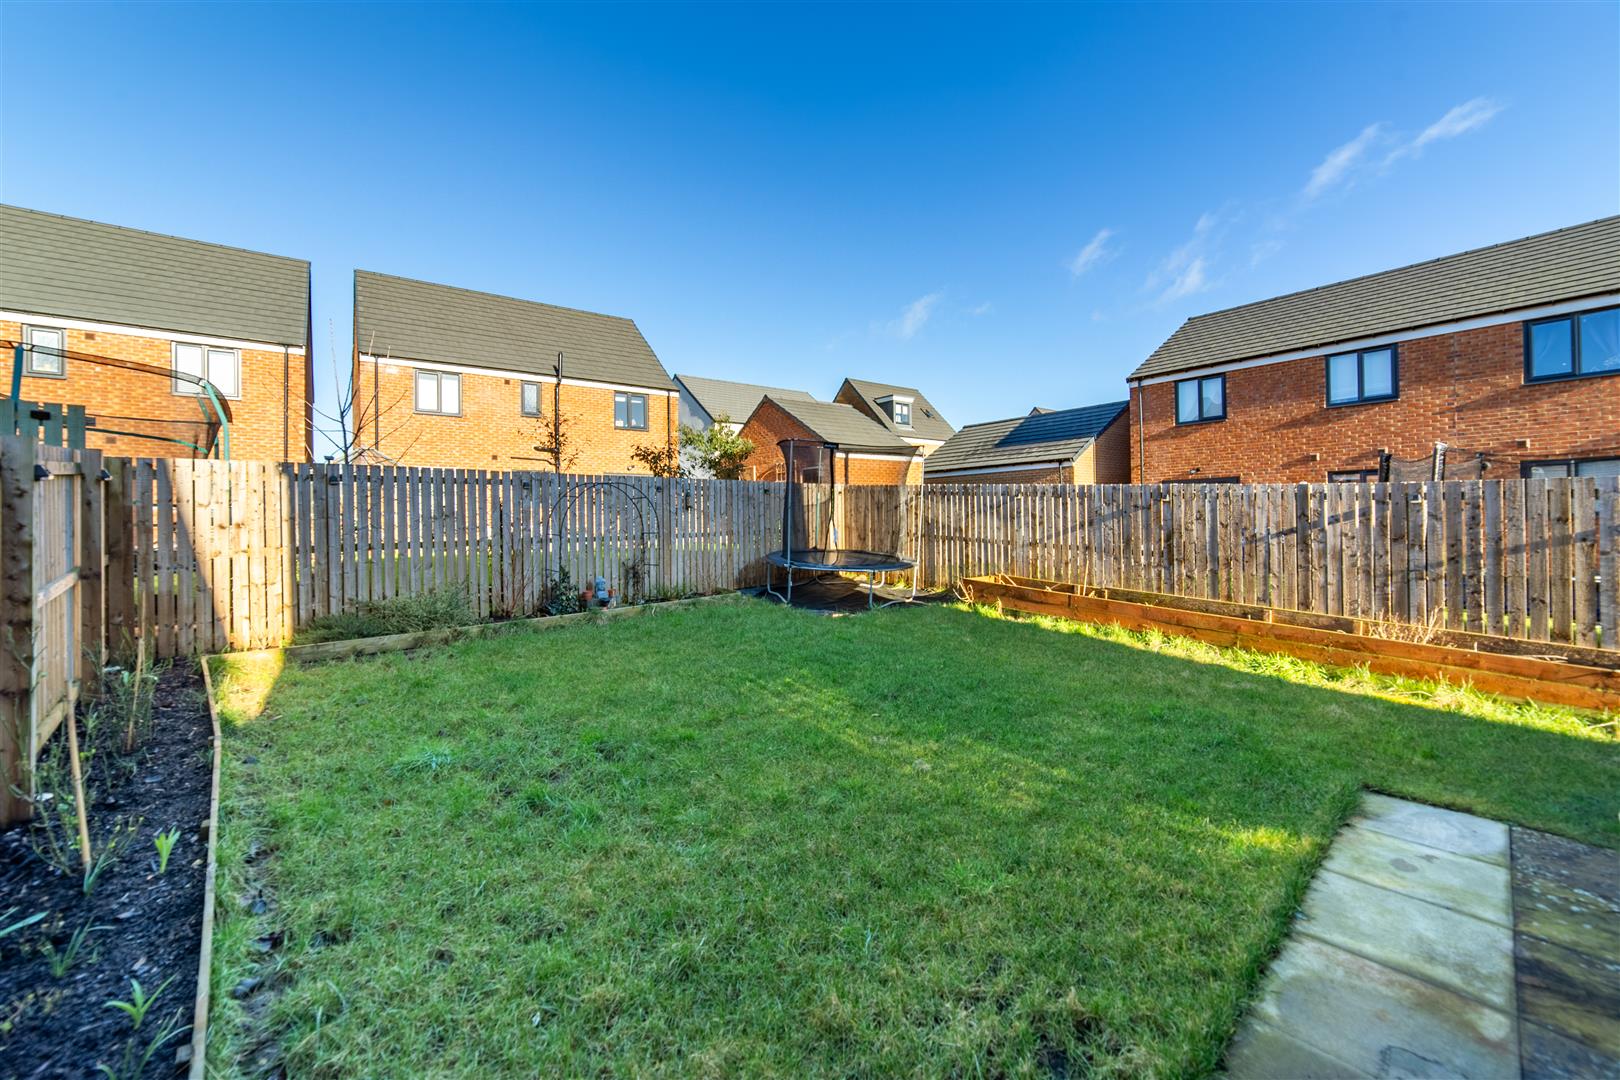 3 bed detached house for sale in Speckledwood Way, Great Park 2